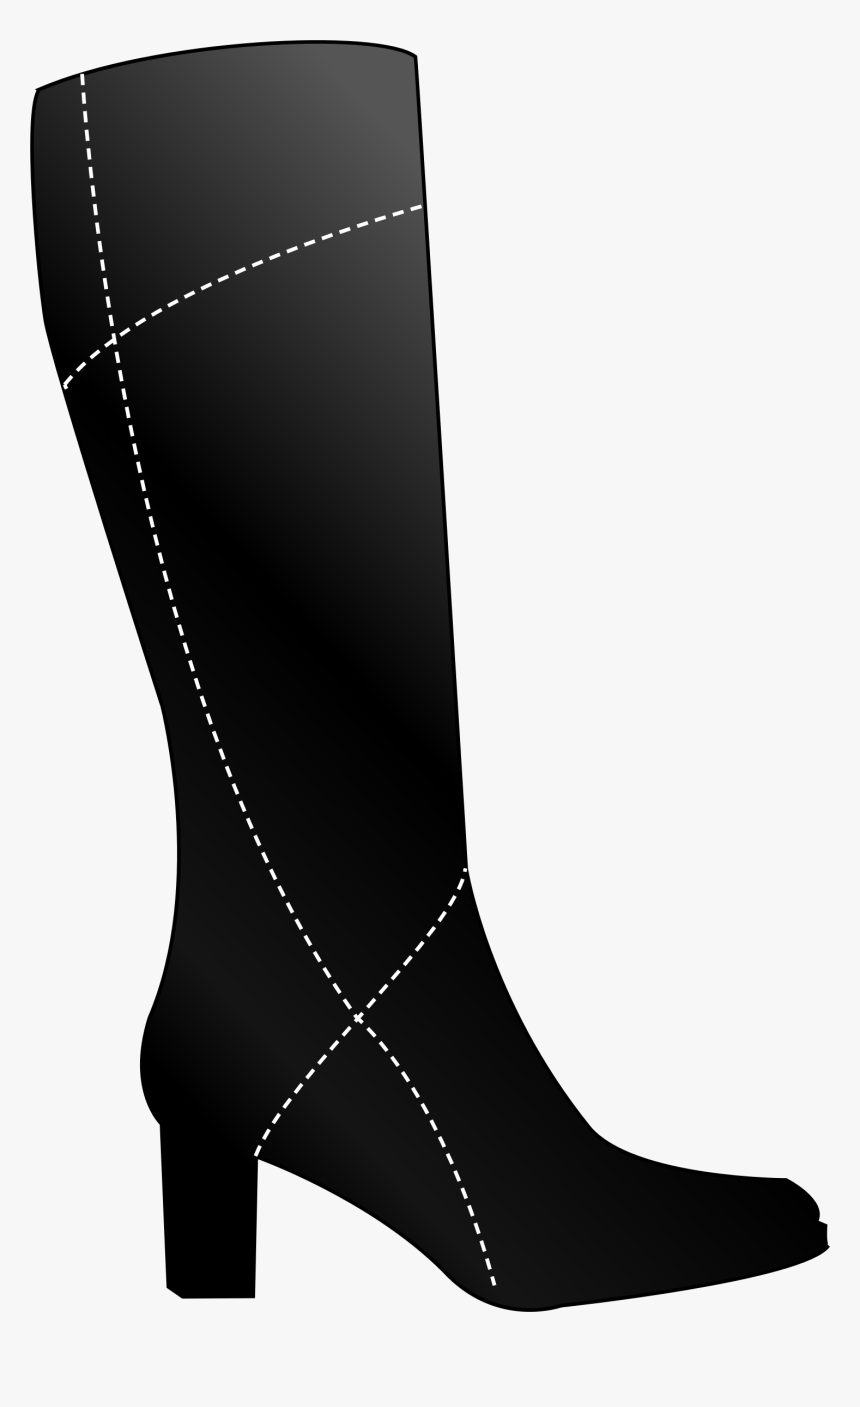 Boot Clipart High Boot - High Heel Boots Clipart, HD Png Download, Free Download